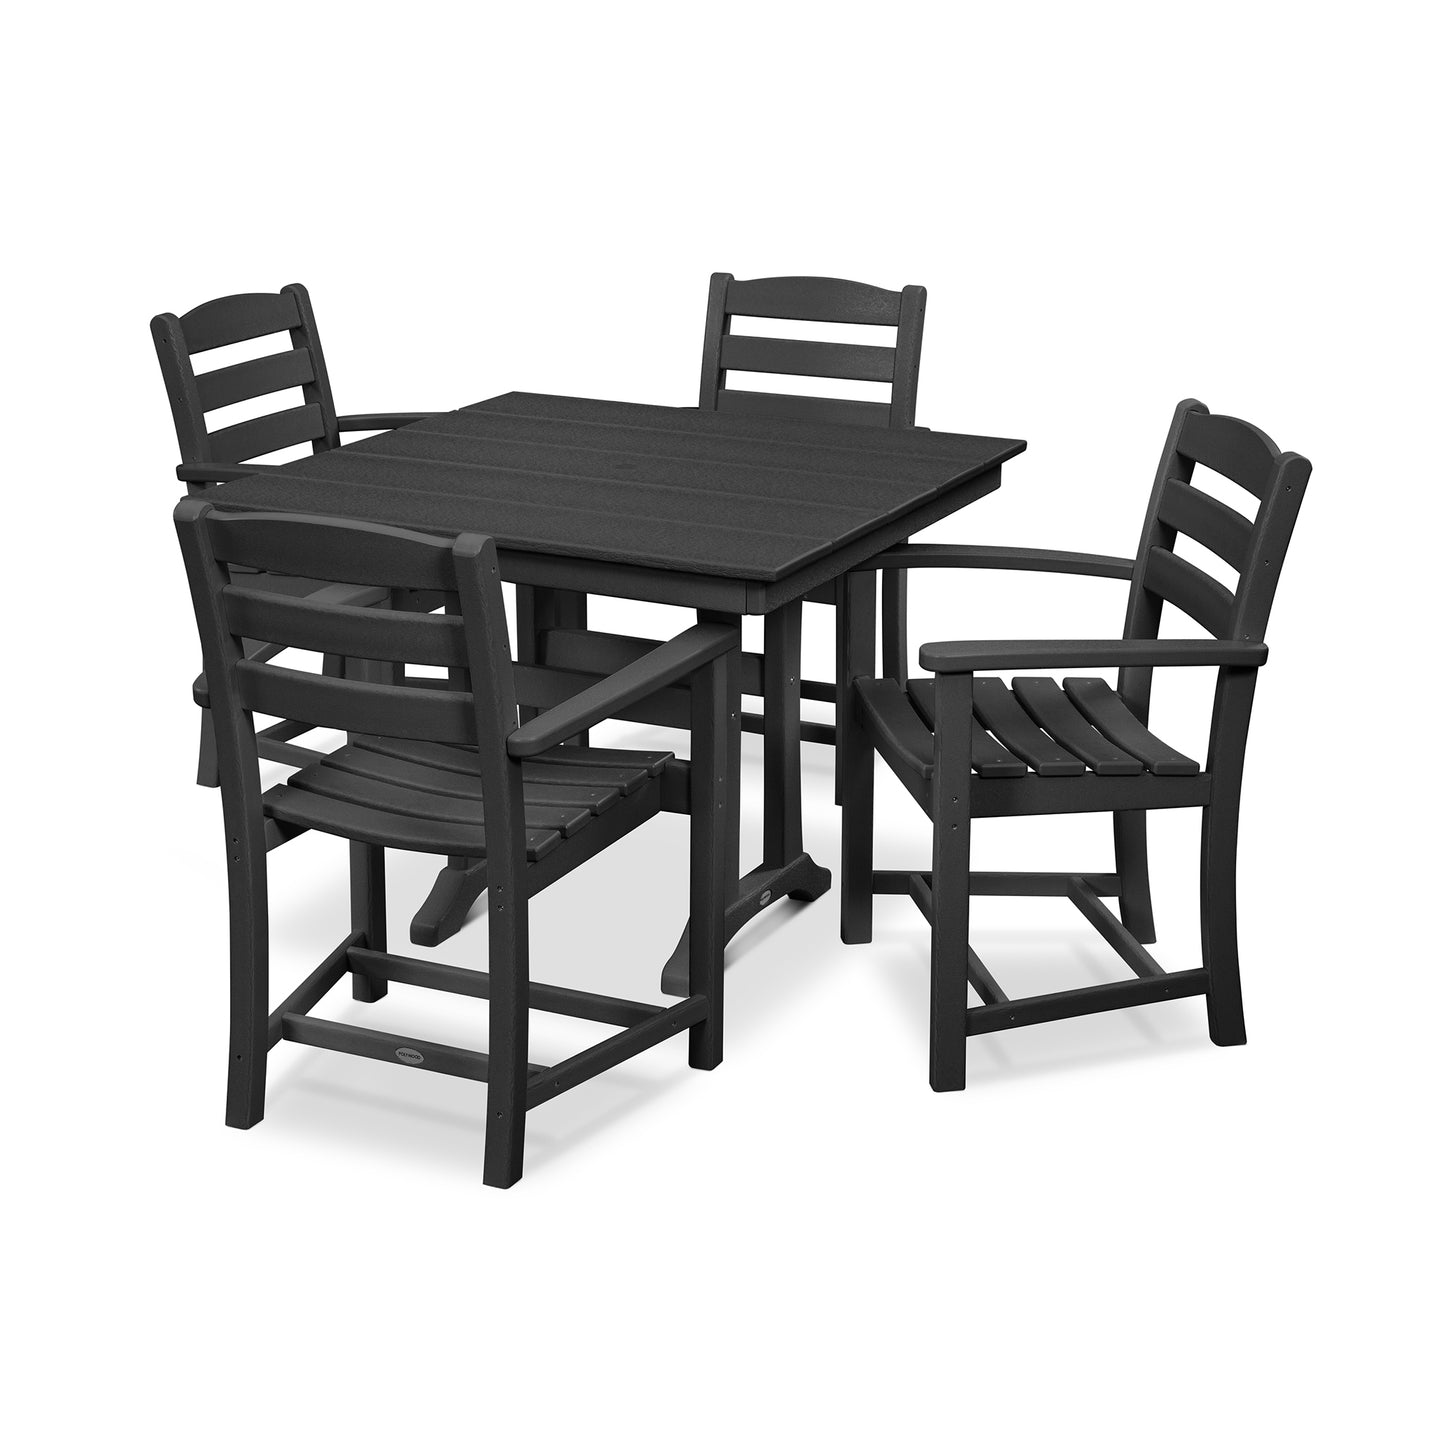 A modern outdoor dining set consisting of a square, black table and four matching chairs, all made of fade-resistant POLYWOOD lumber, displayed against a white background.